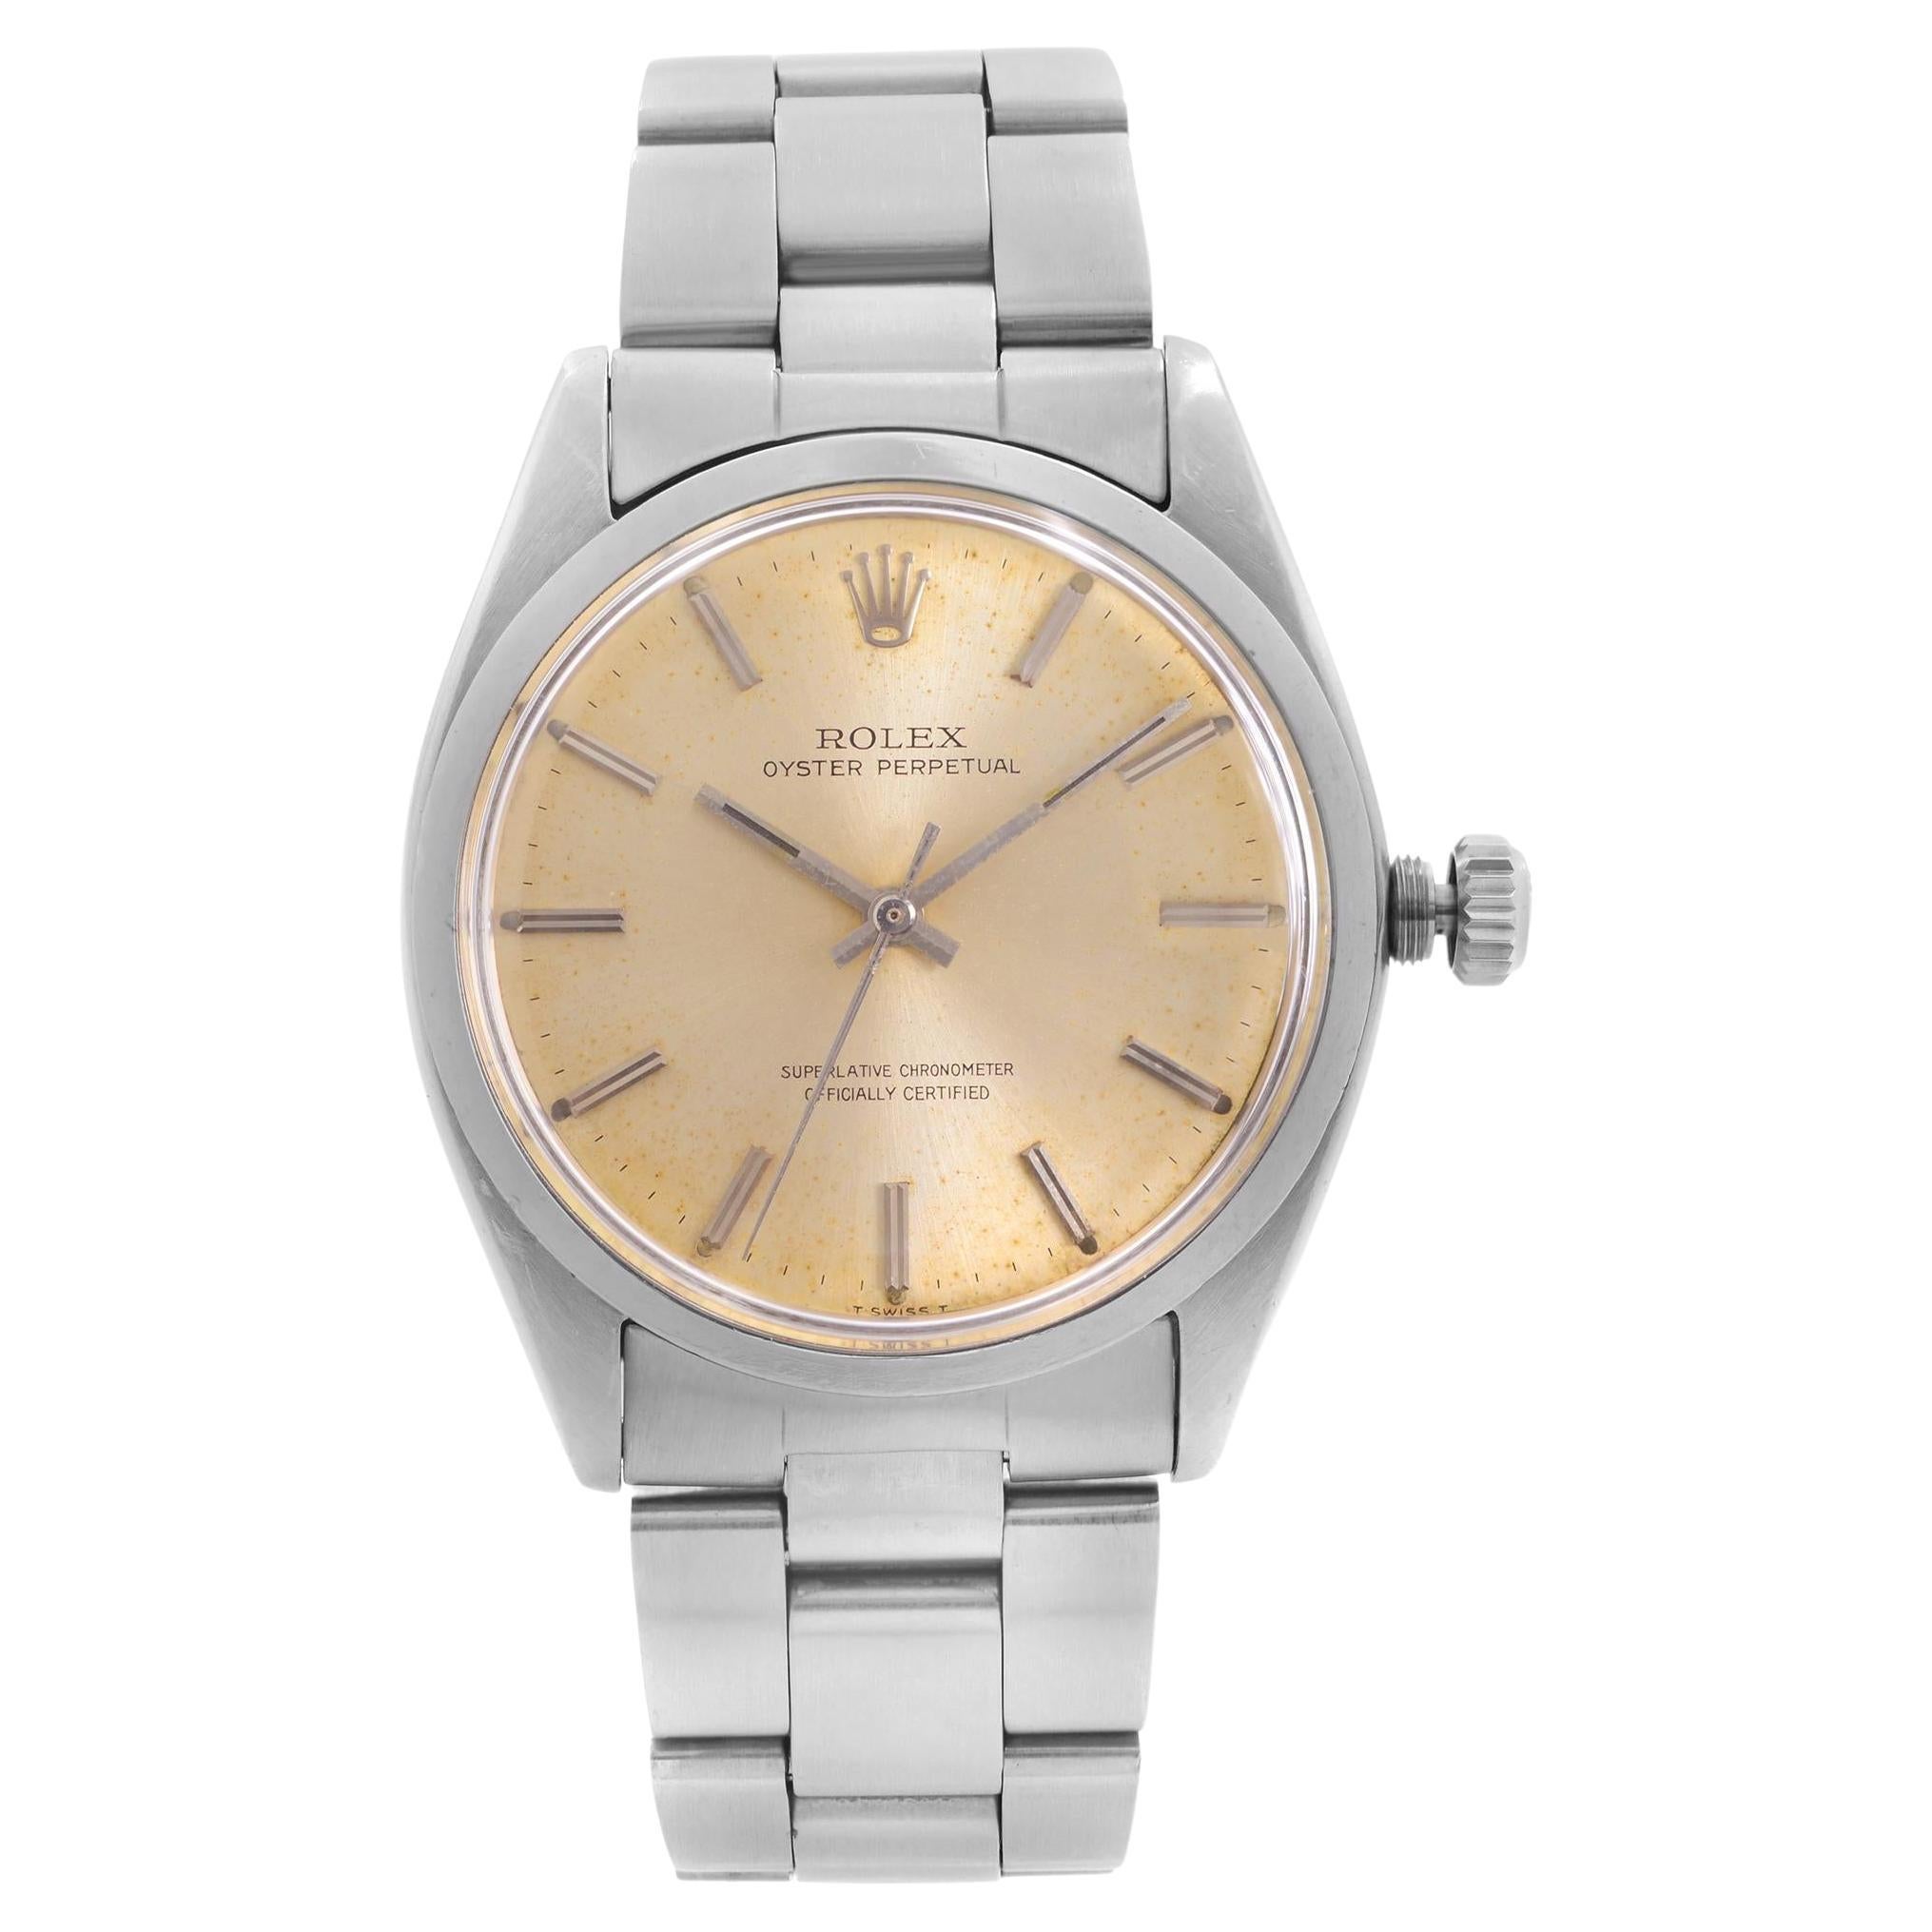 Vintage Rolex Oyster Perpetual Stainless Steel Silver Dial Automatic Watch 1002 For Sale